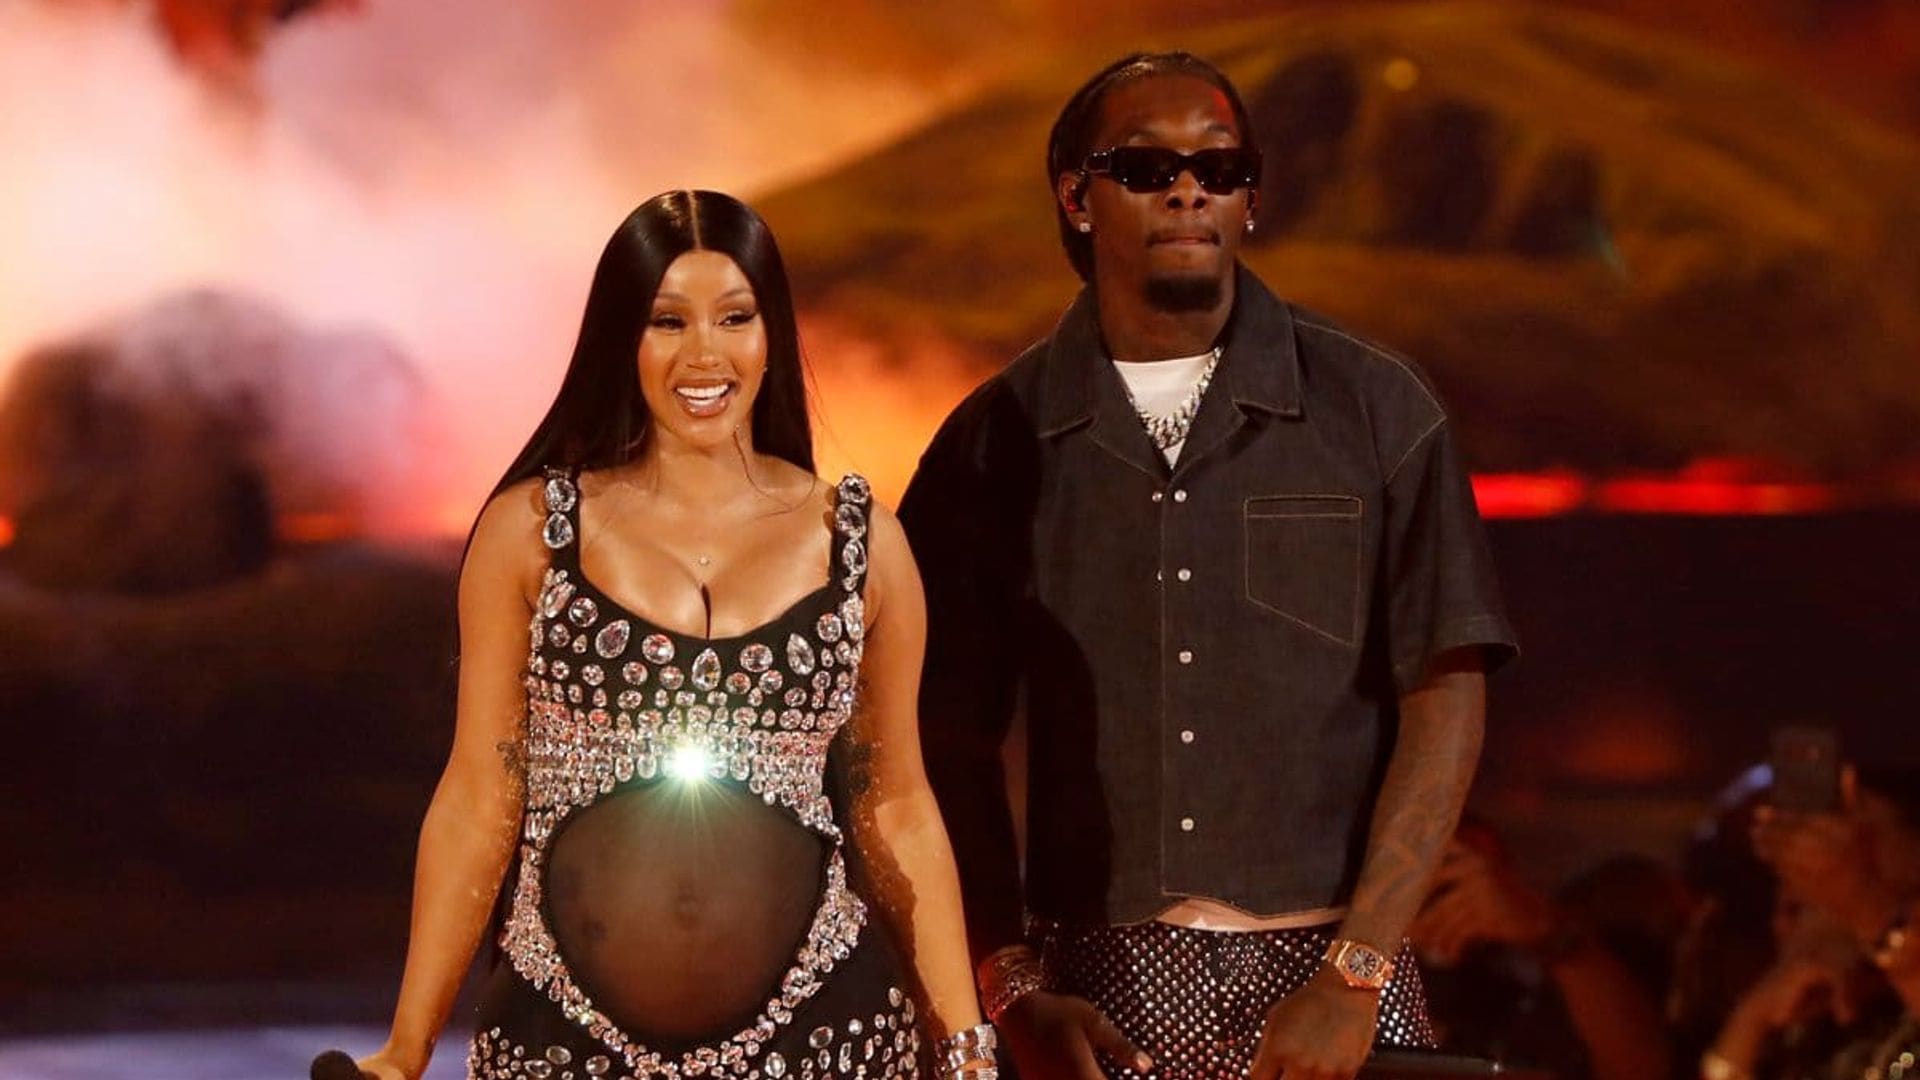 Cardi B announced her pregnancy in the most iconic way